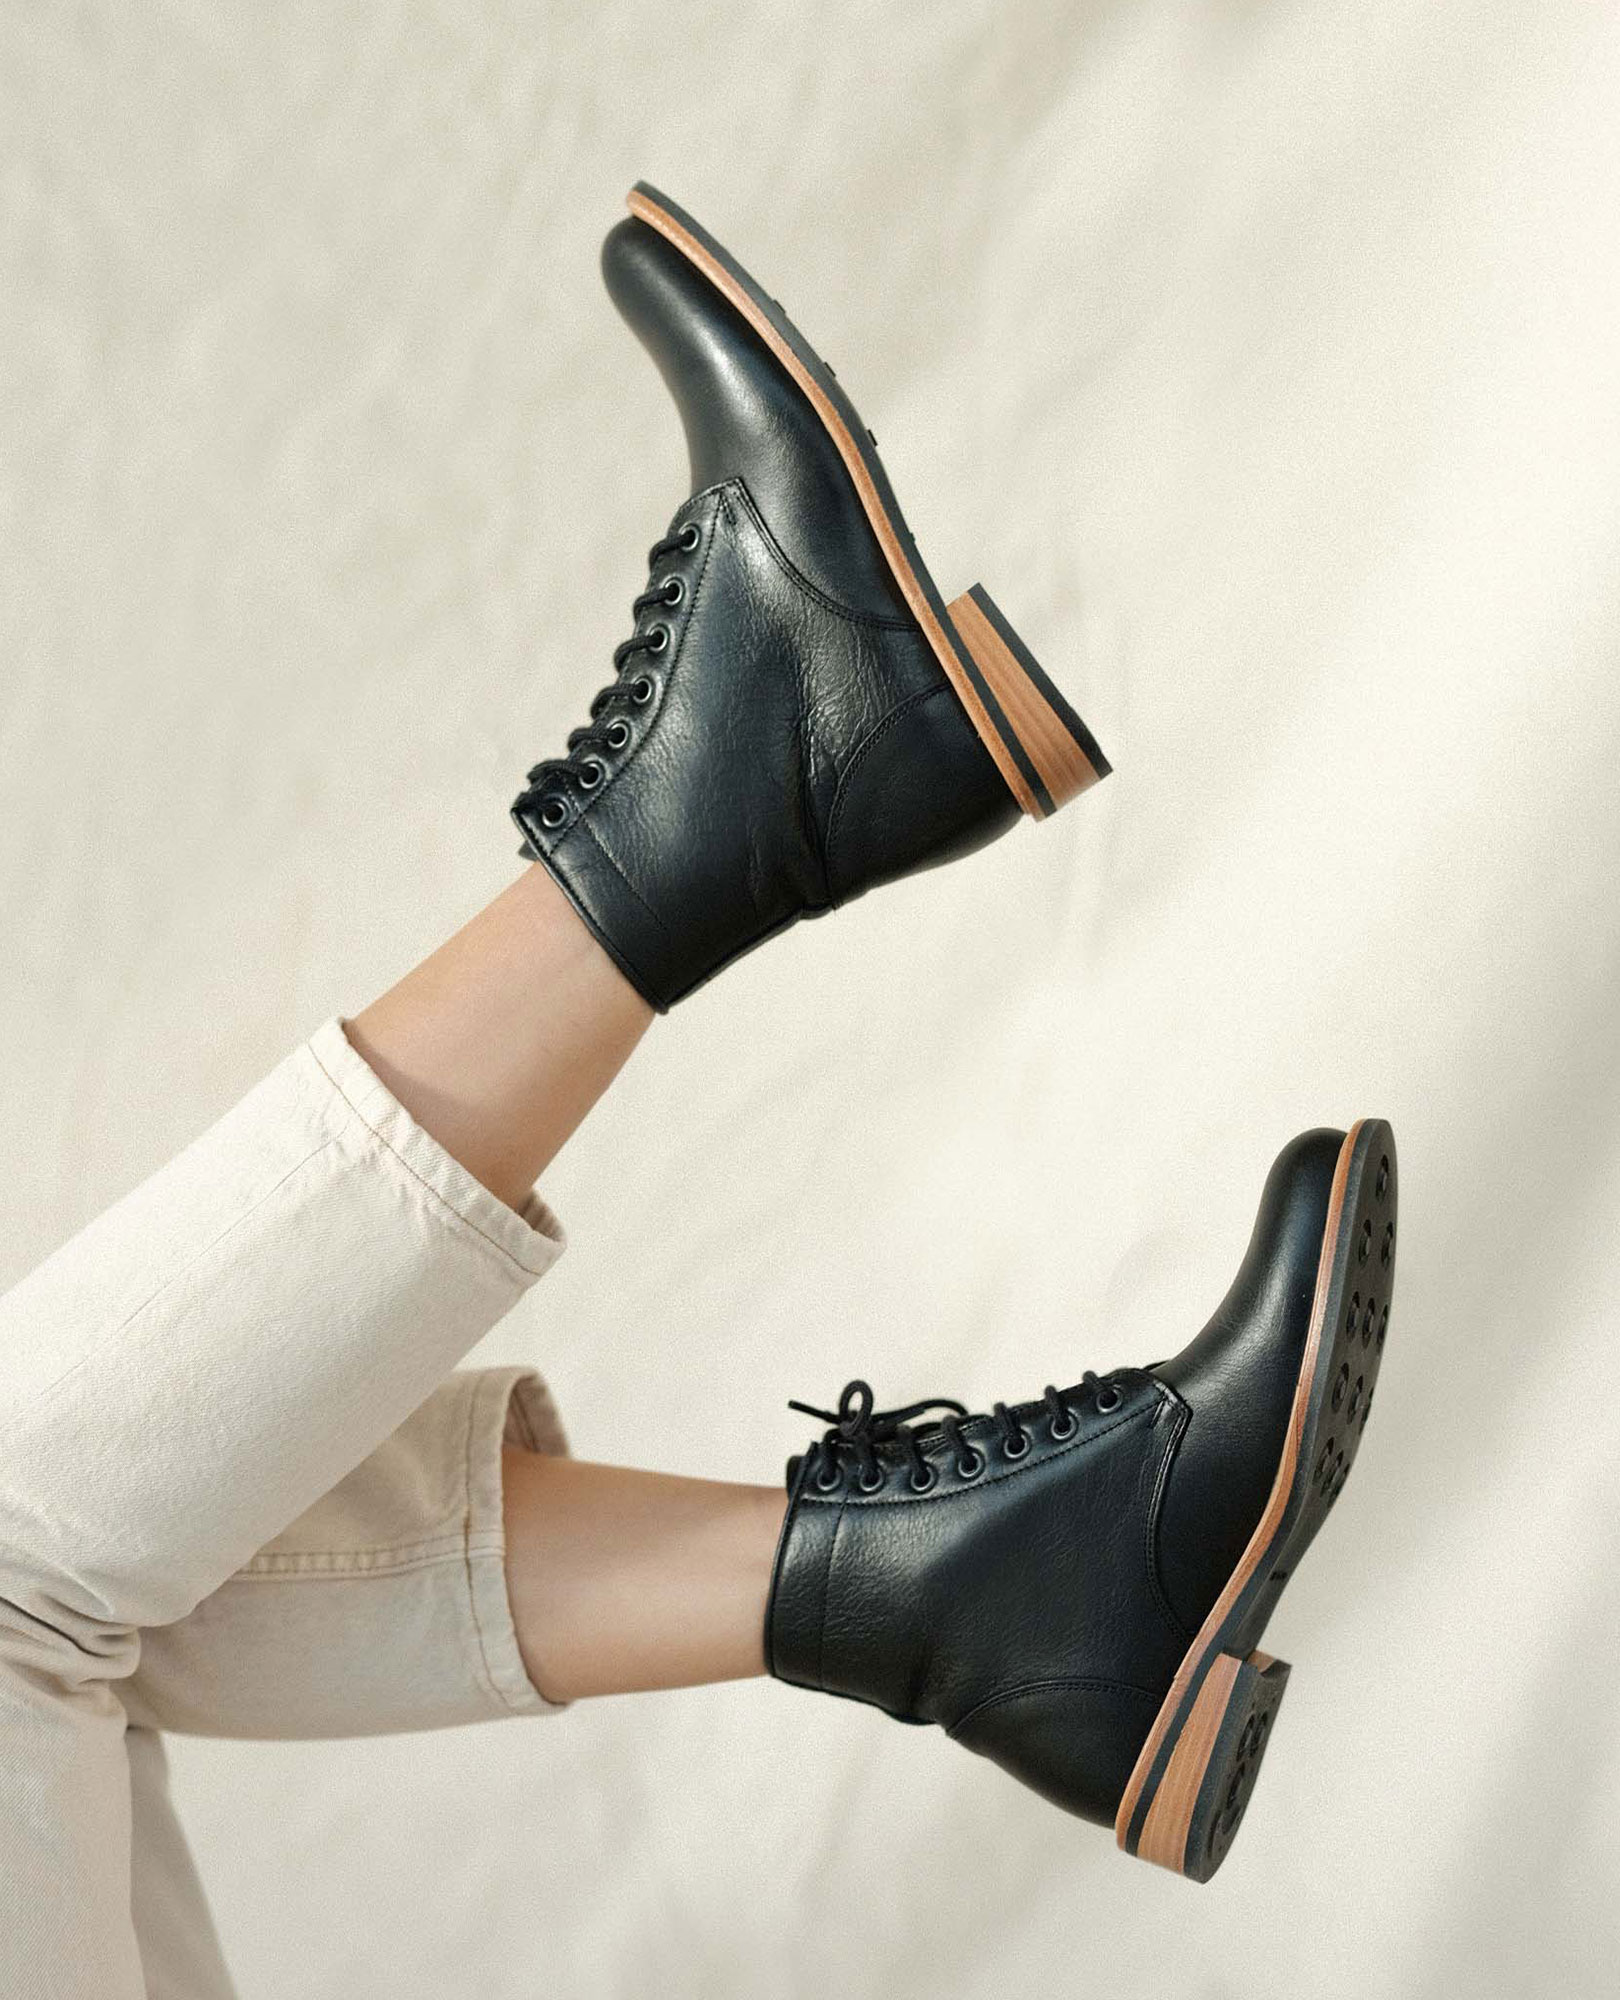 sparkpick features nisolo leather combat boots in sustainable fashion